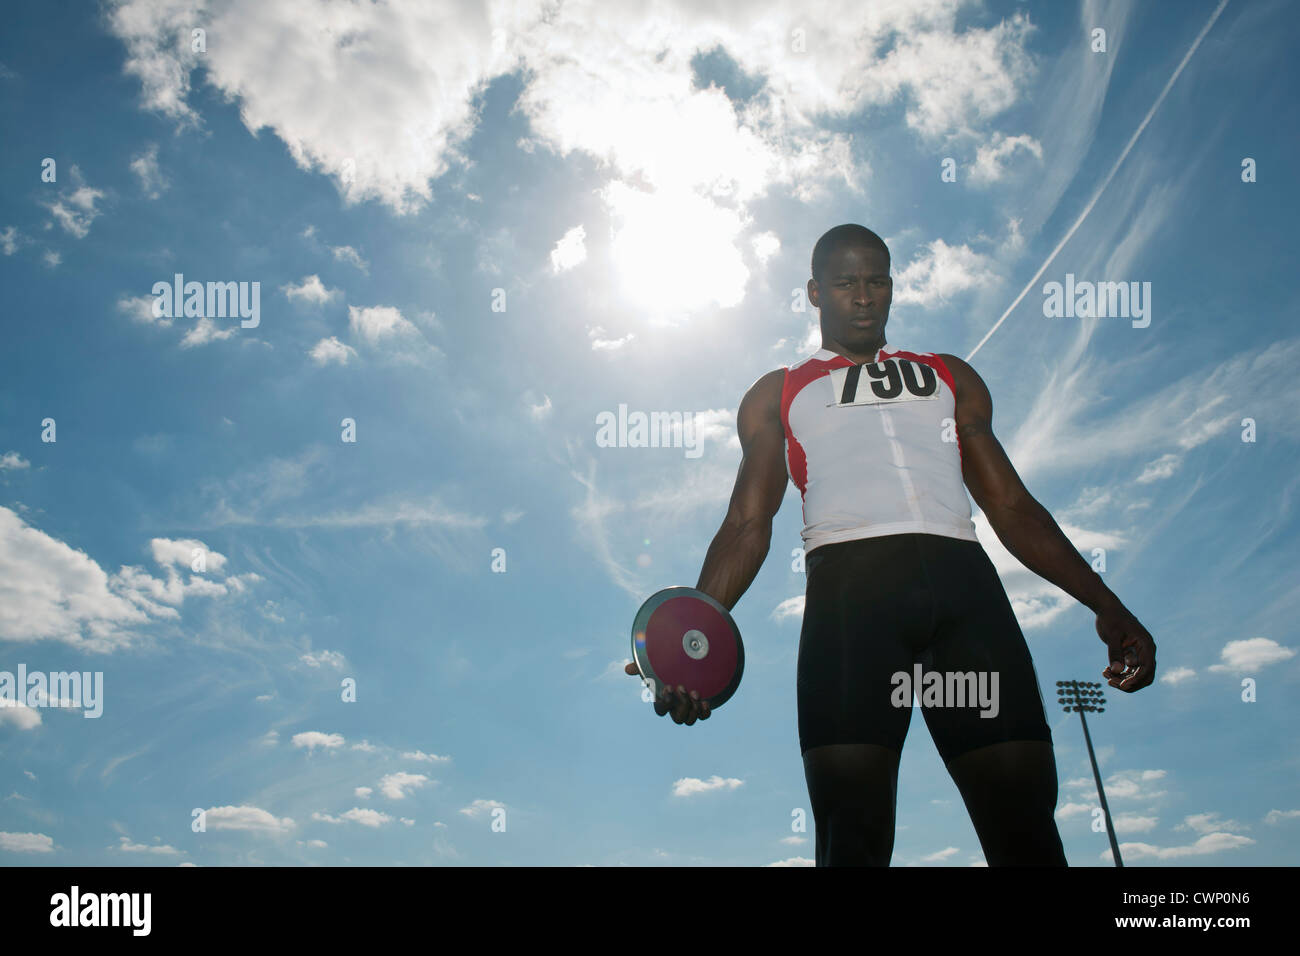 Male athlete holding discus, low angle view Stock Photo